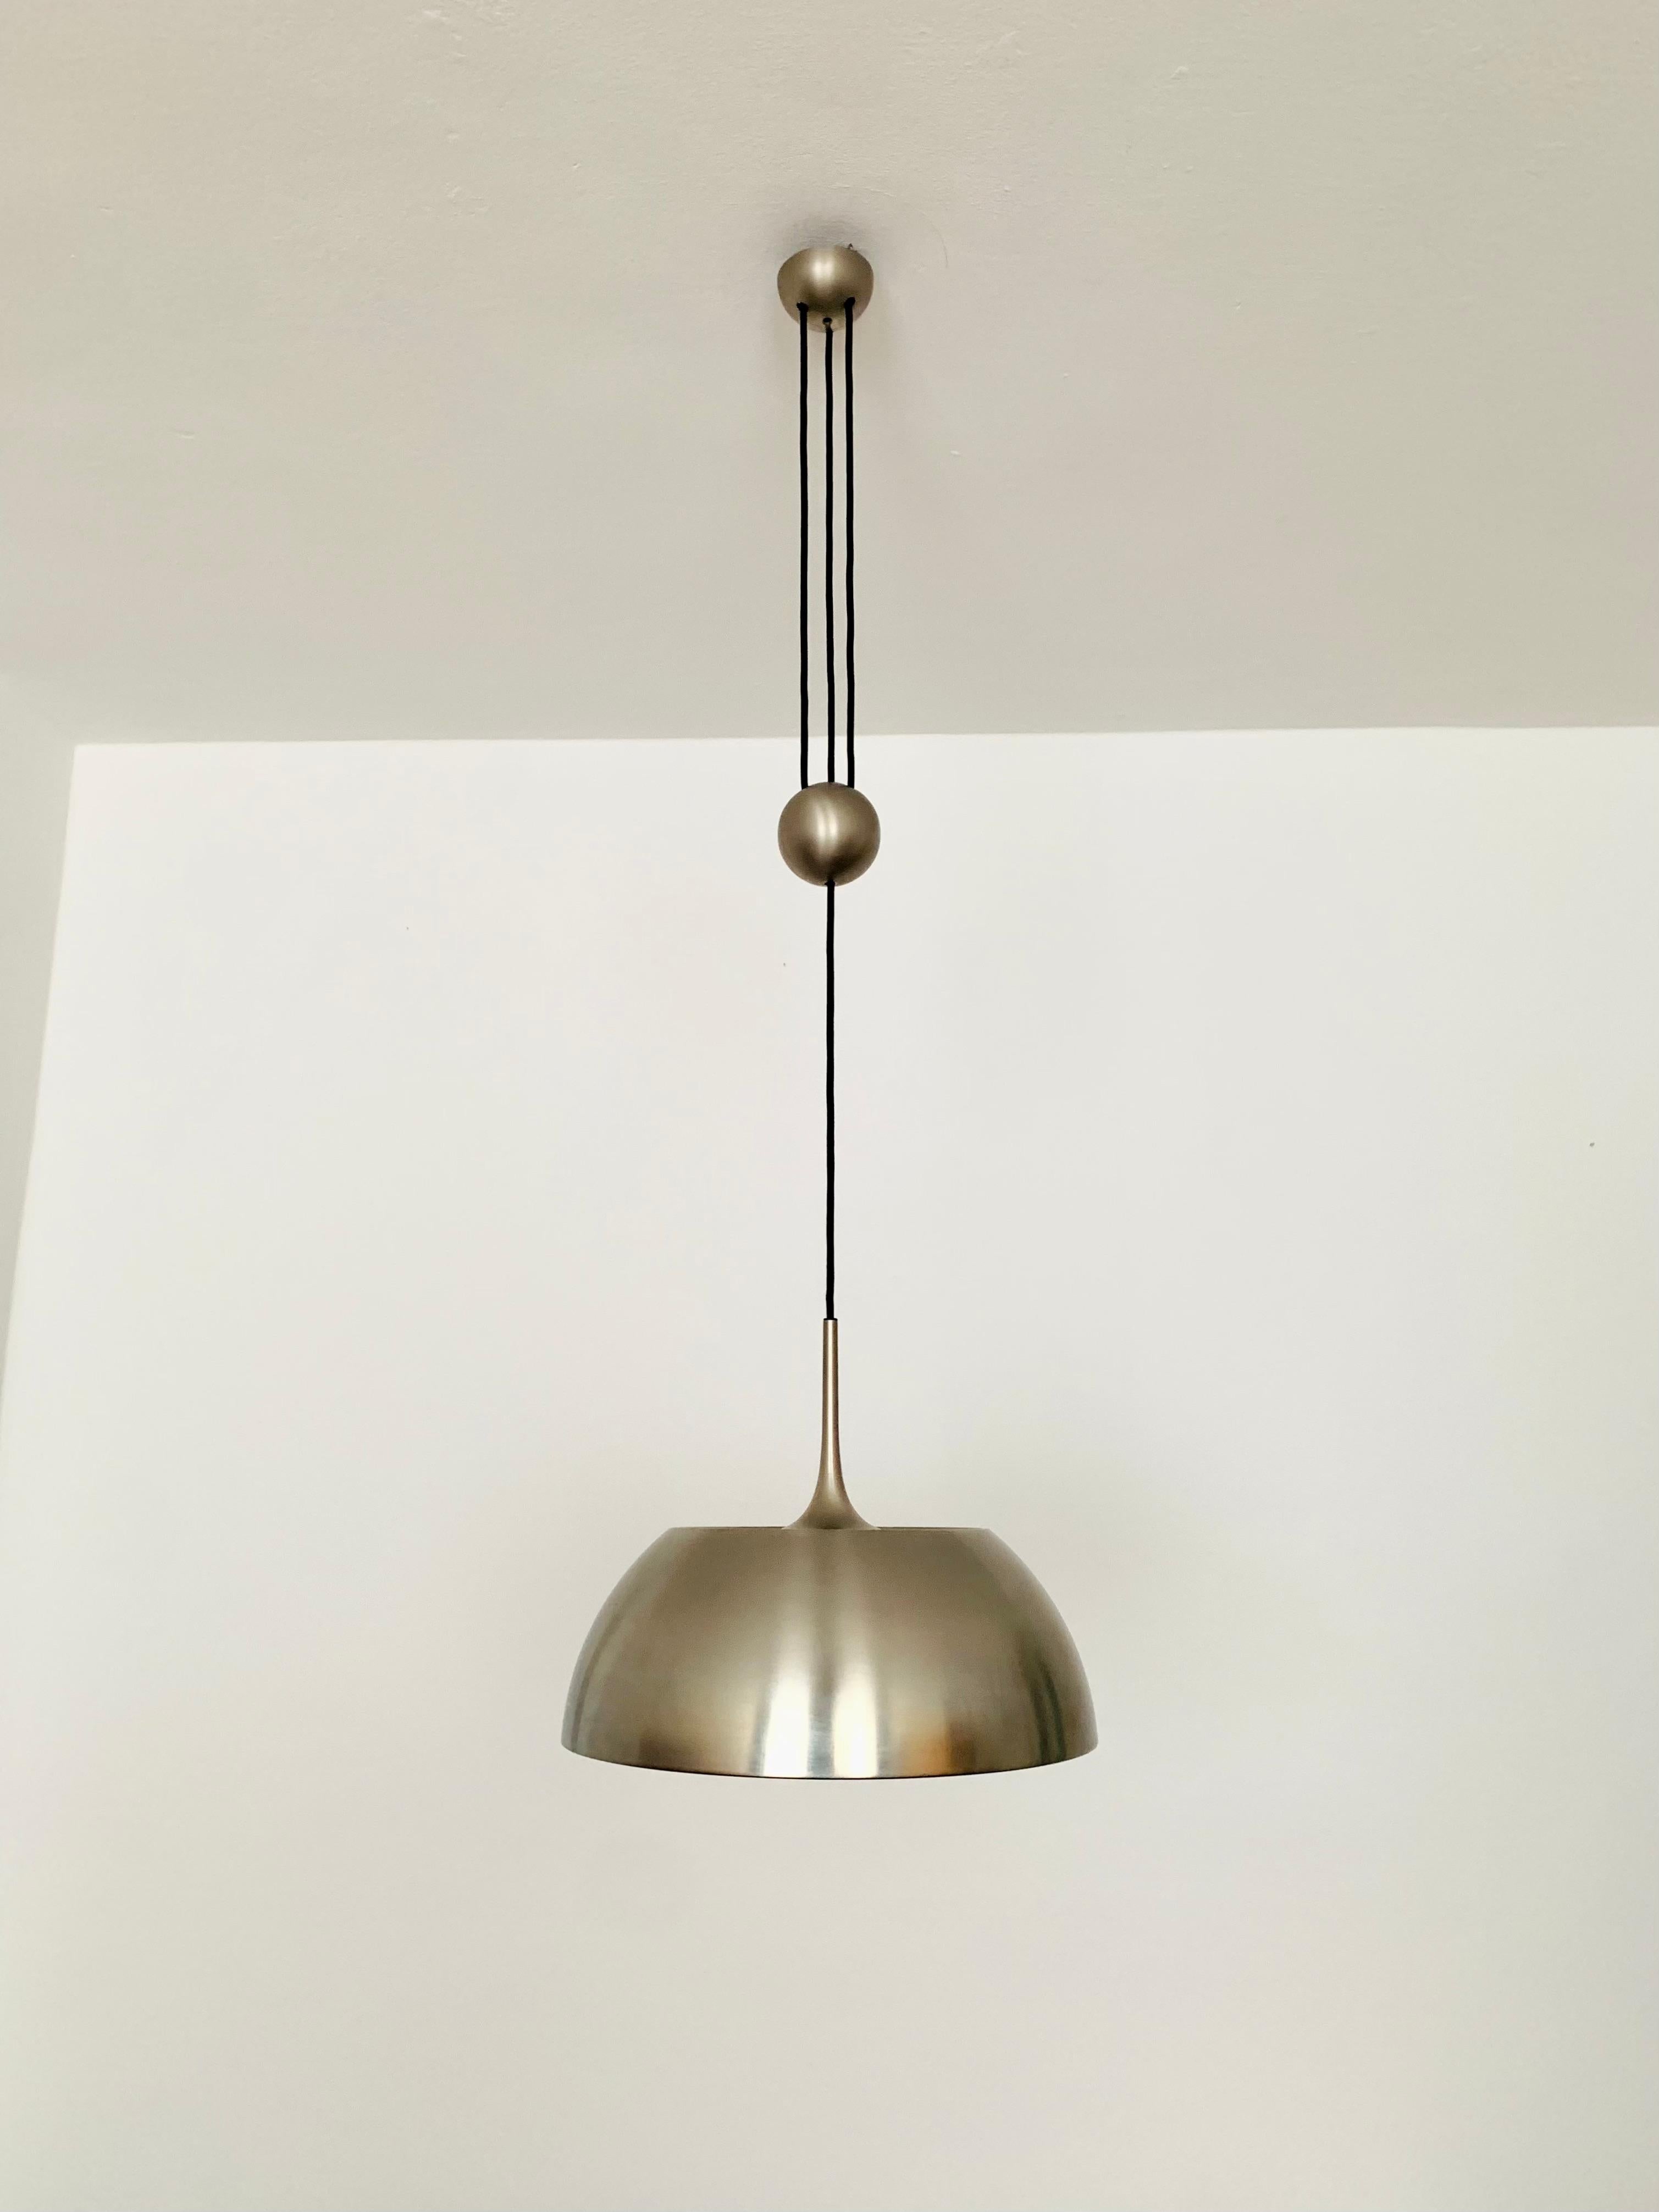 Adjustable Pendant Lamp with Counterweight by Florian Schulz In Good Condition For Sale In München, DE